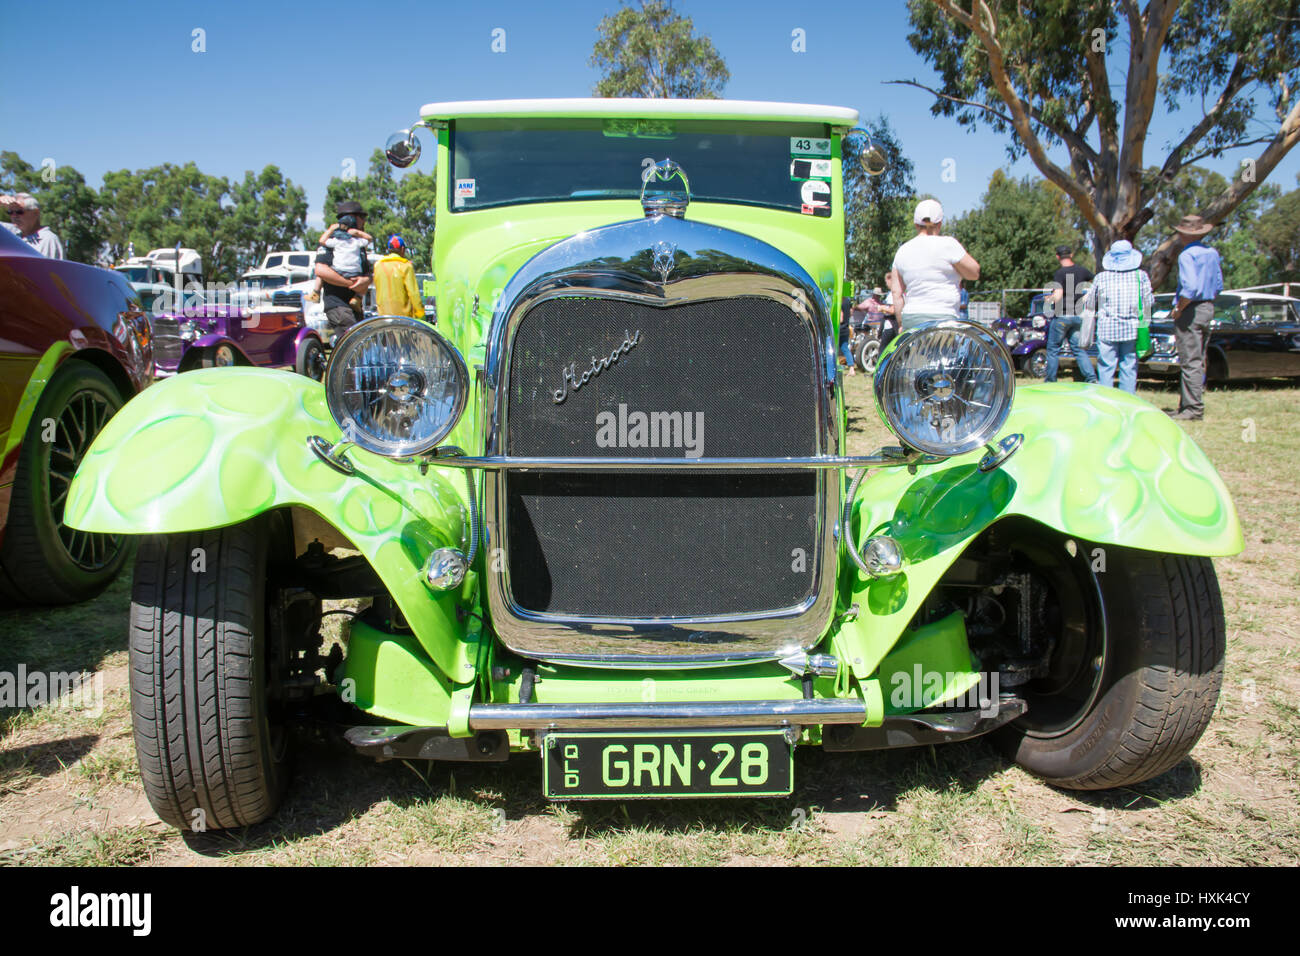 1928/29 Ford Modell A Hot Rod in Shades of Lime Green. Stockfoto